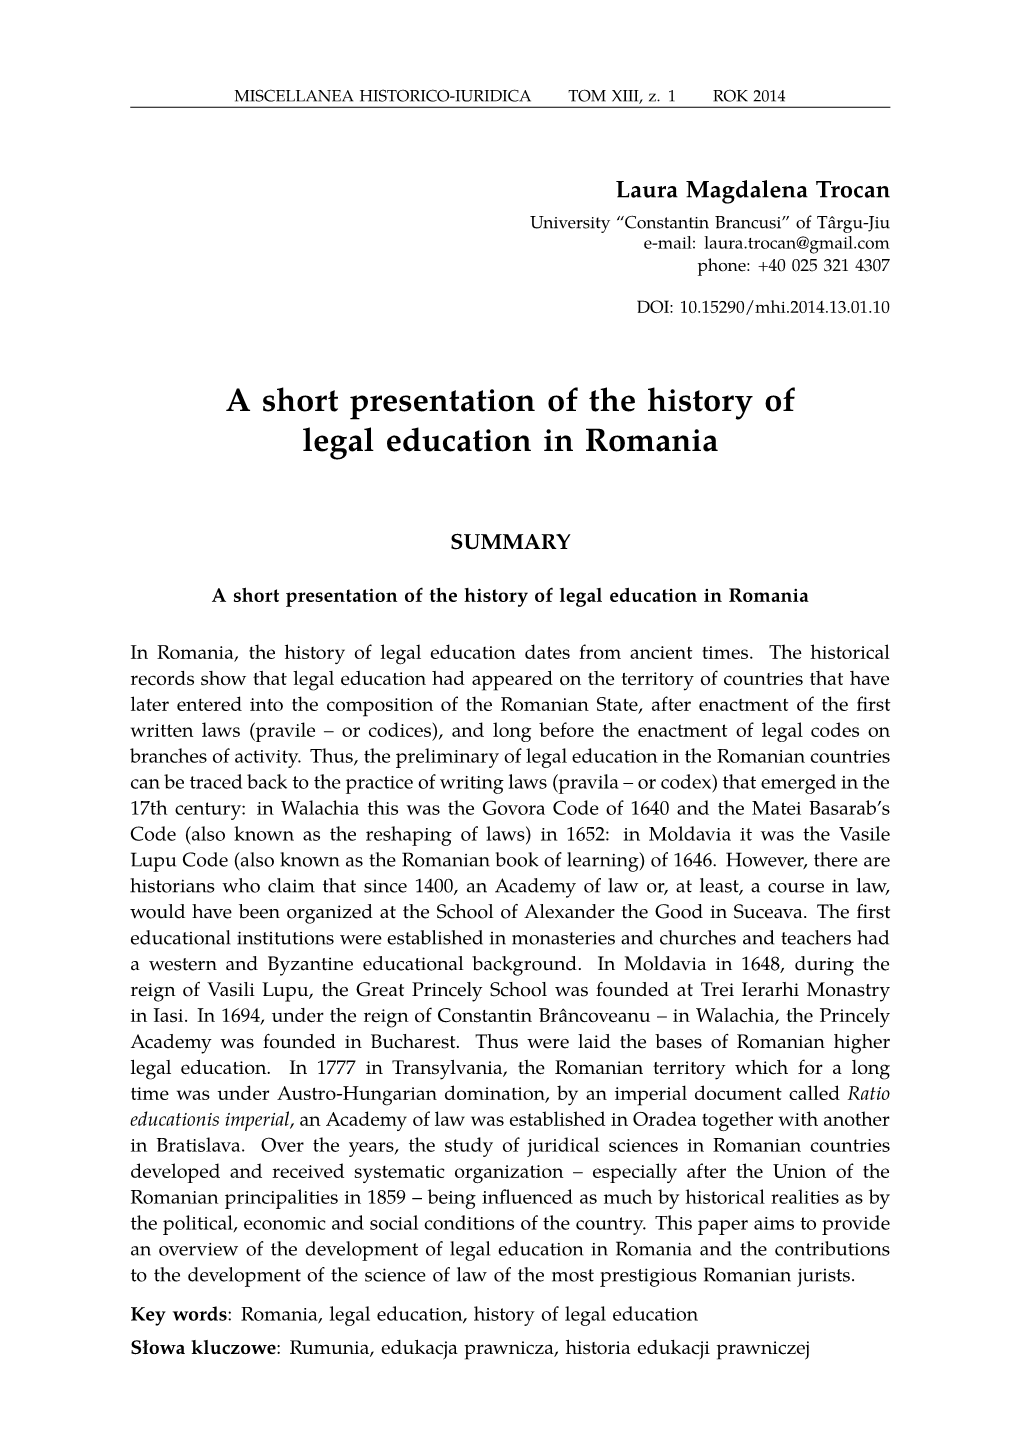 A Short Presentation of the History of Legal Education in Romania